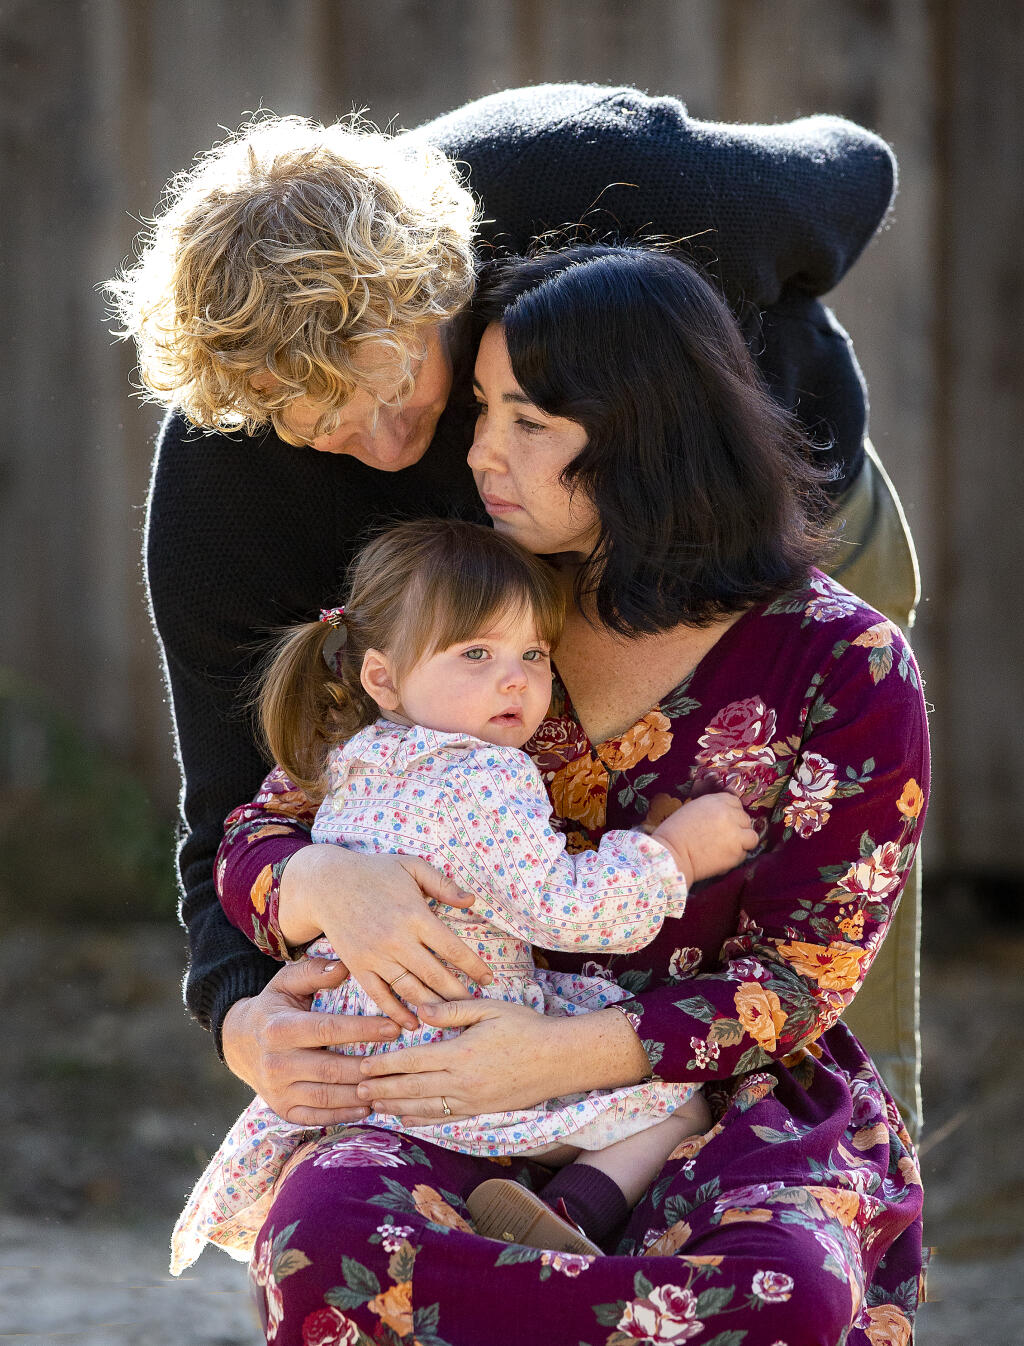 Devi Katz, husband Hunter Ellis and their daughter, Alma, 2, contracted the coronavirus back in July, but after recovering from the initial illness Alma developed multisystem inflammatory syndrome or MIS-C. Alma is now recovered from the dangerous disease that causes inflammation of the lungs, heart, blood vessels, brain and digestive system. (John Burgess / The Press Democrat)